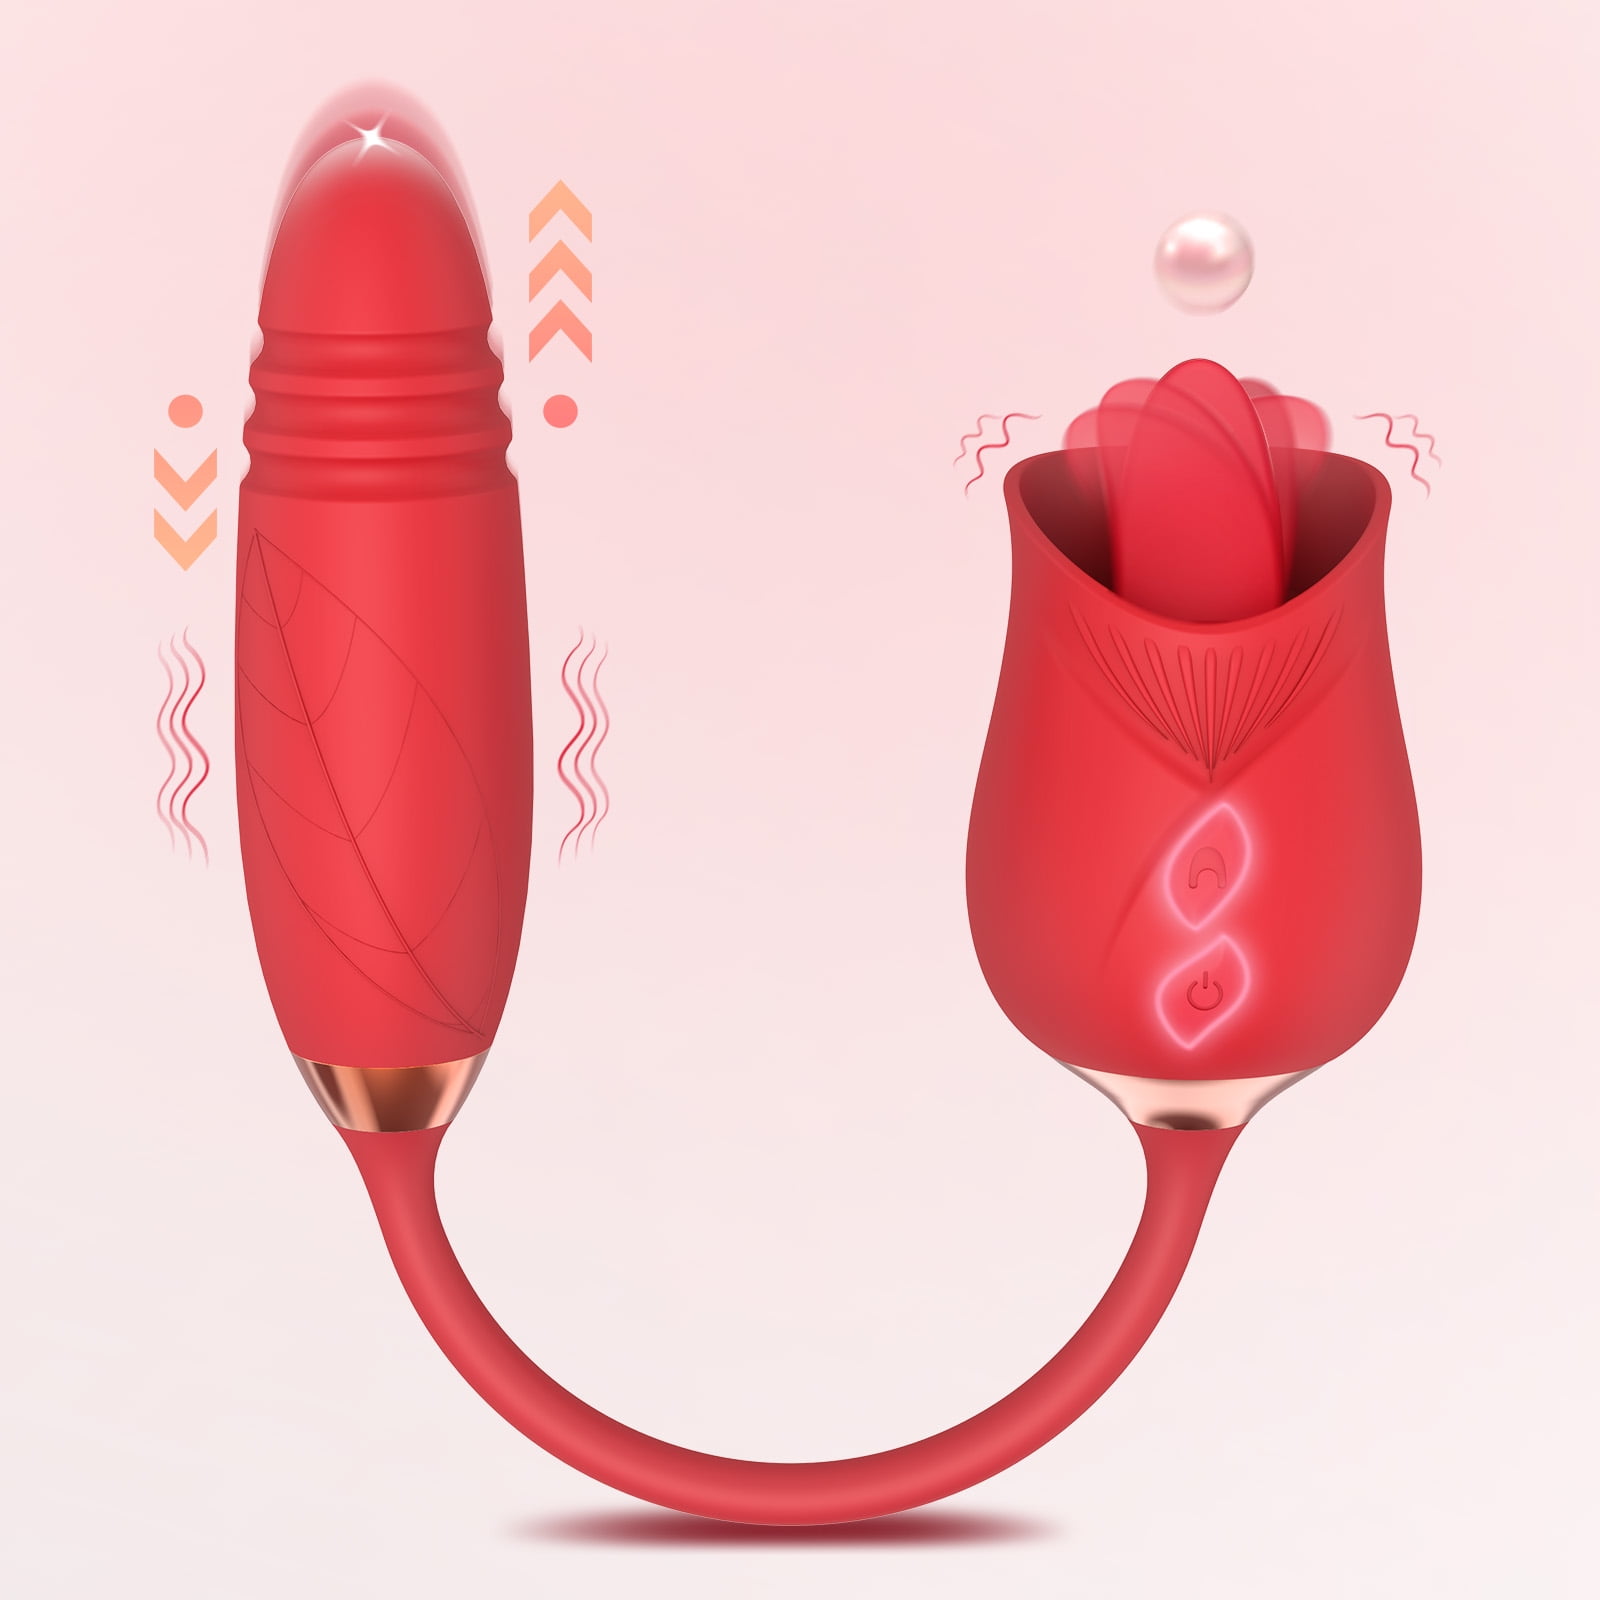 Rose Sex Toys for Women - 2 in 1 Adult Rose Sex Stimulator Vibrator Dildo for Nipple G Spot, Butt Plug for Woman Couples Pleasure(Red) pic